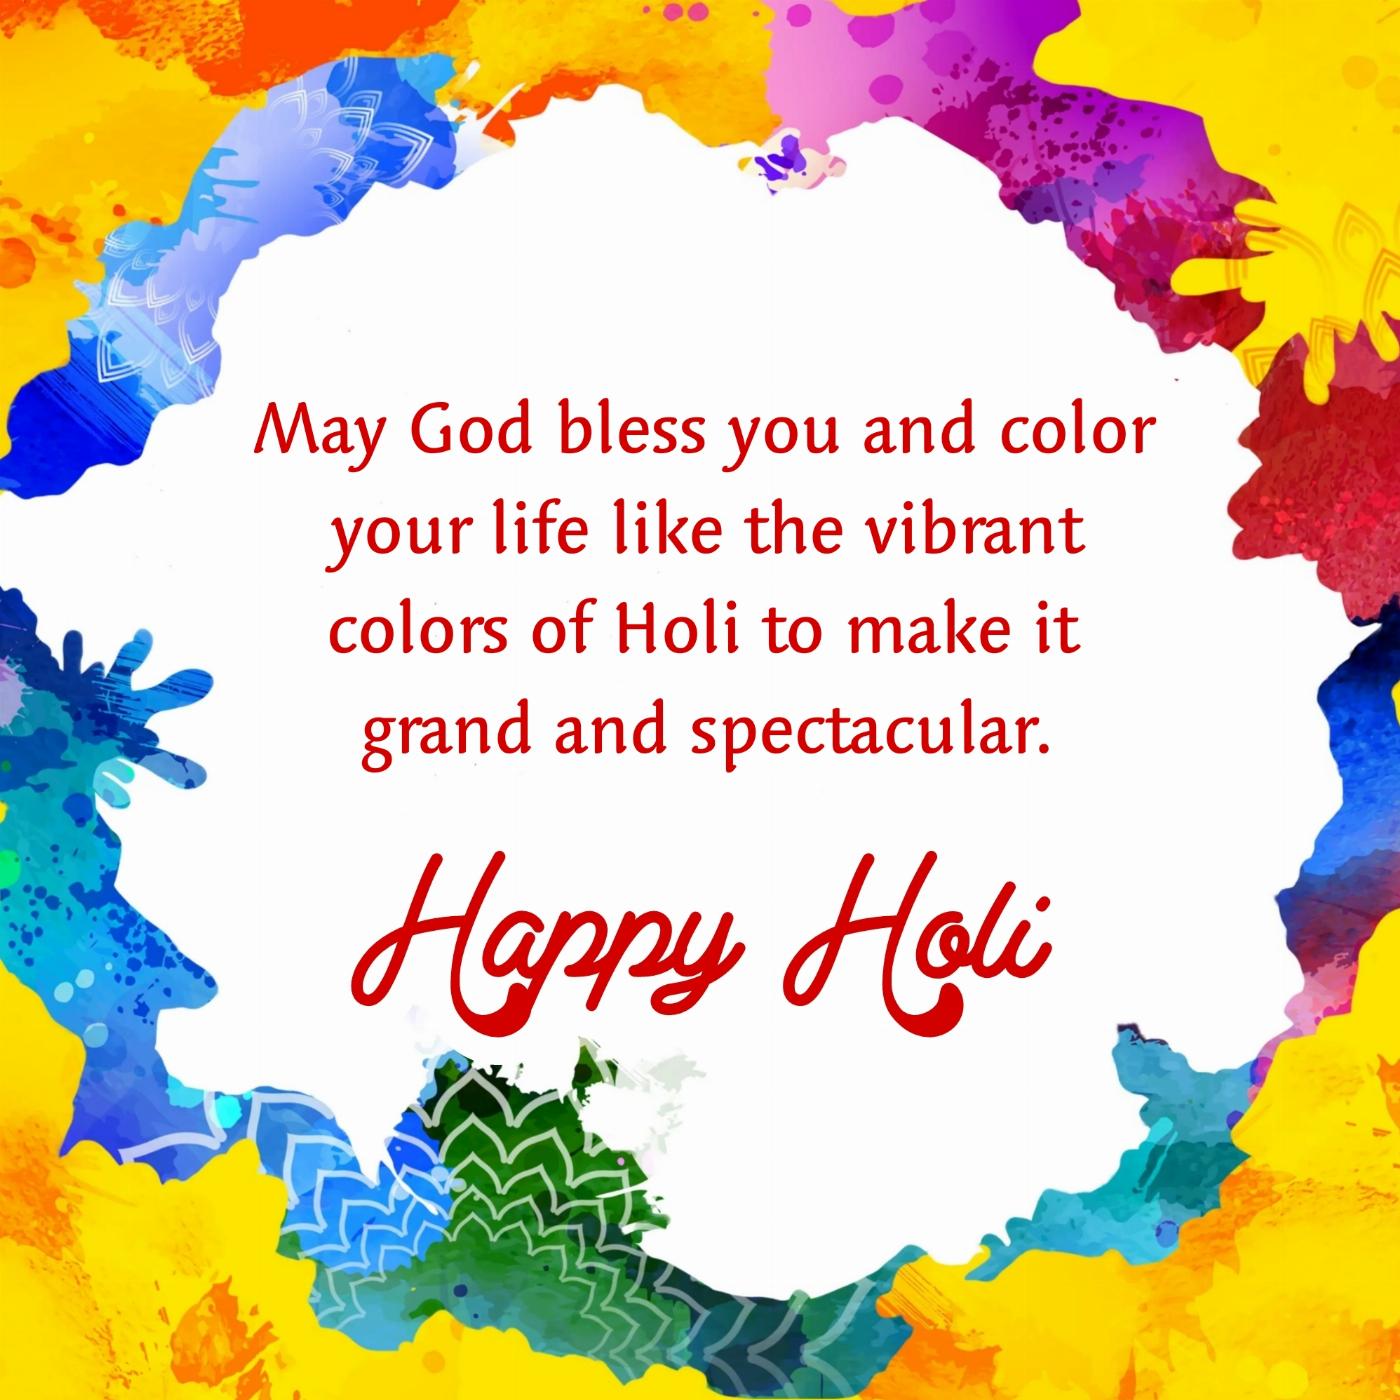 May God bless you and color your life like the vibrant colors of Holi